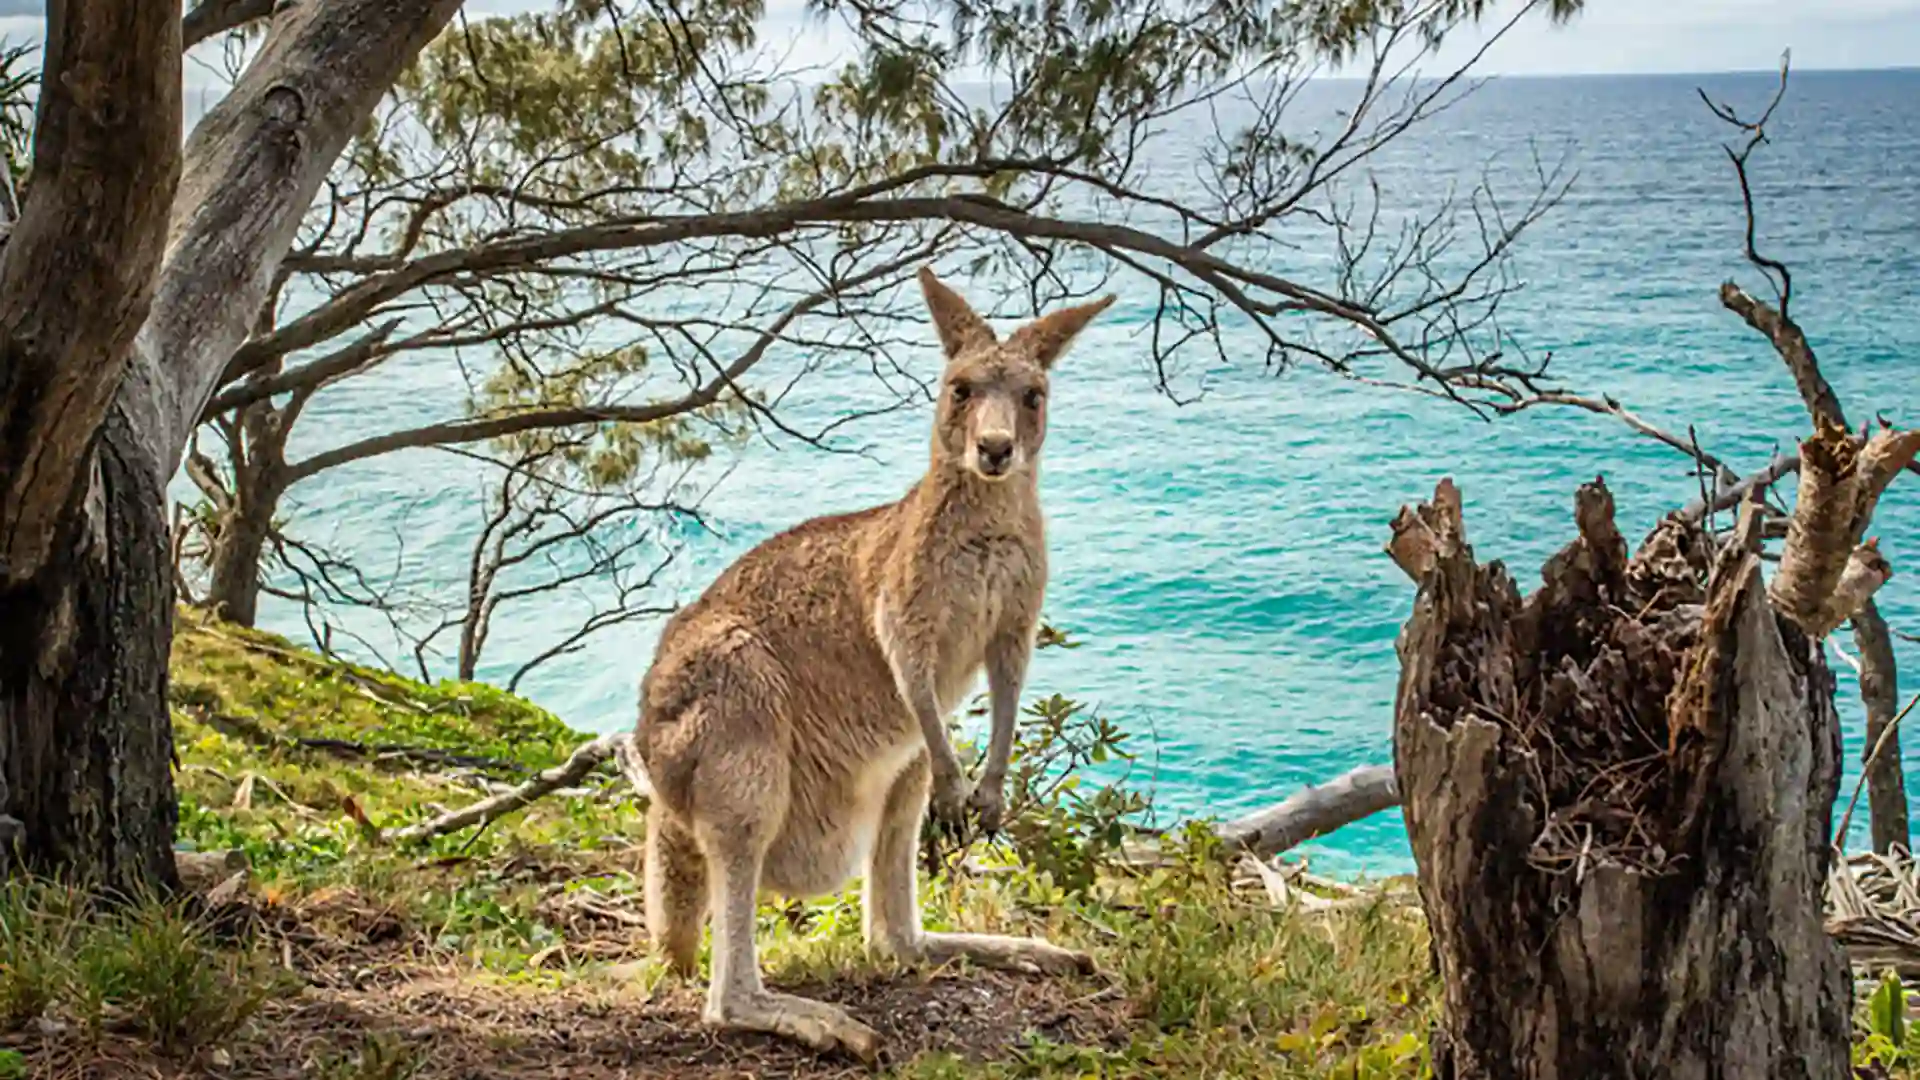 View of a kangaroo by tree with ocean in background.